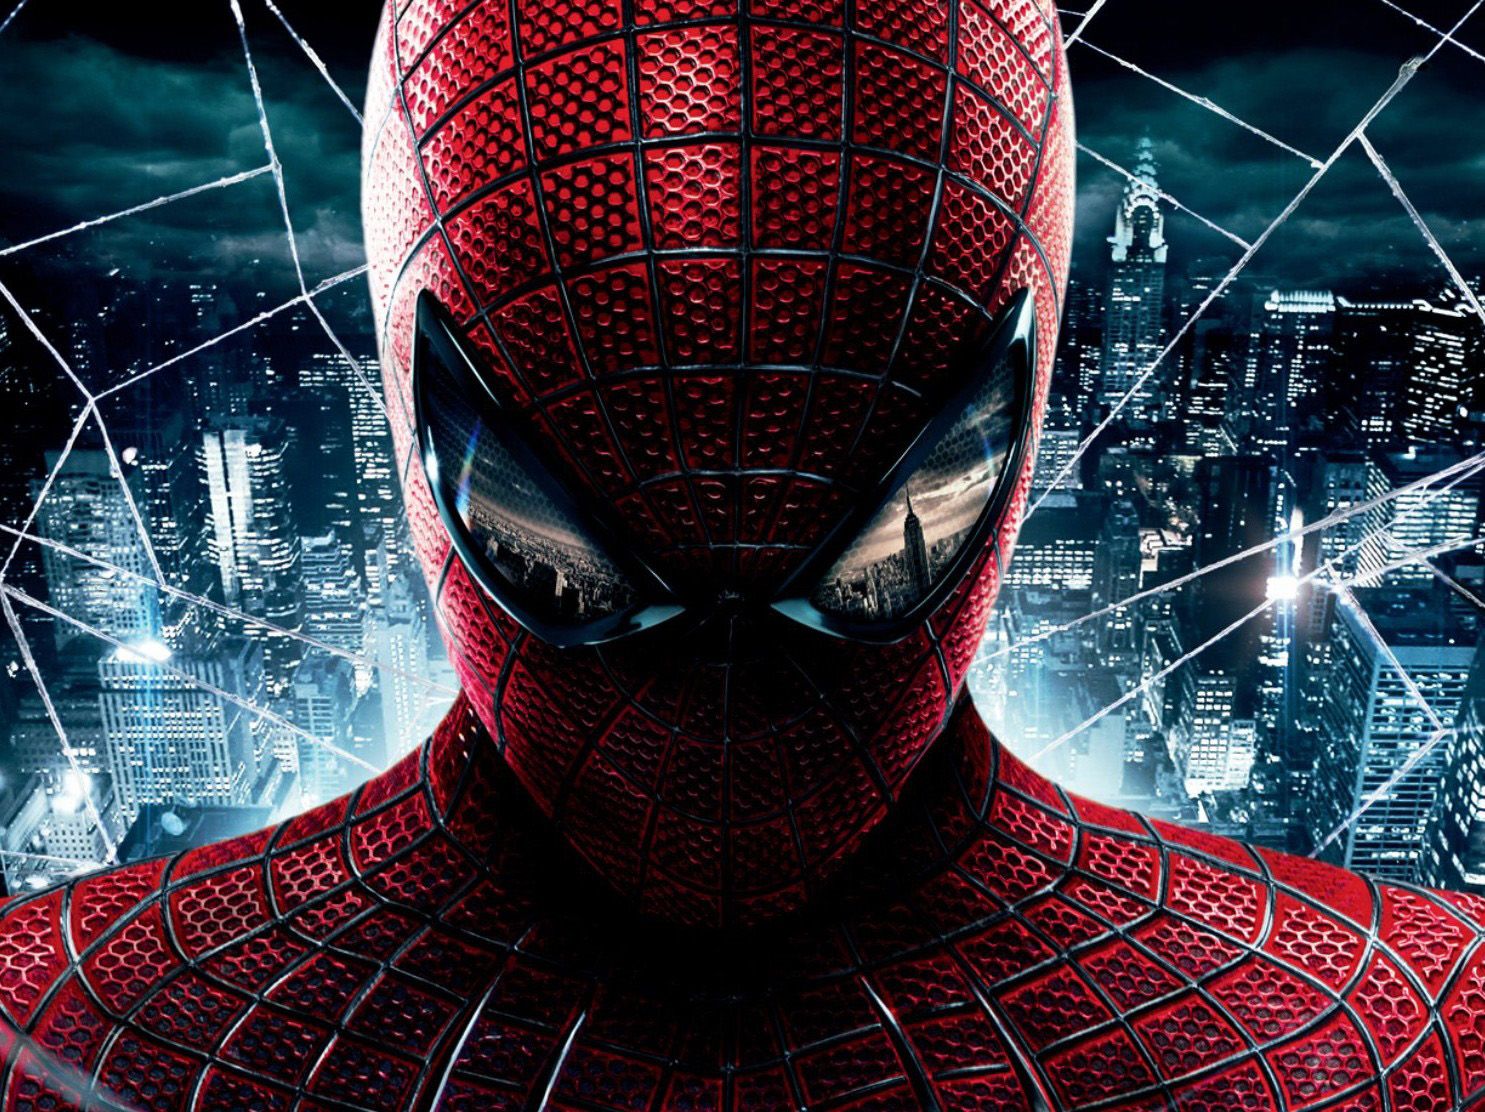 The Amazing Spider-Man 2 Soundtrack List | List of Songs